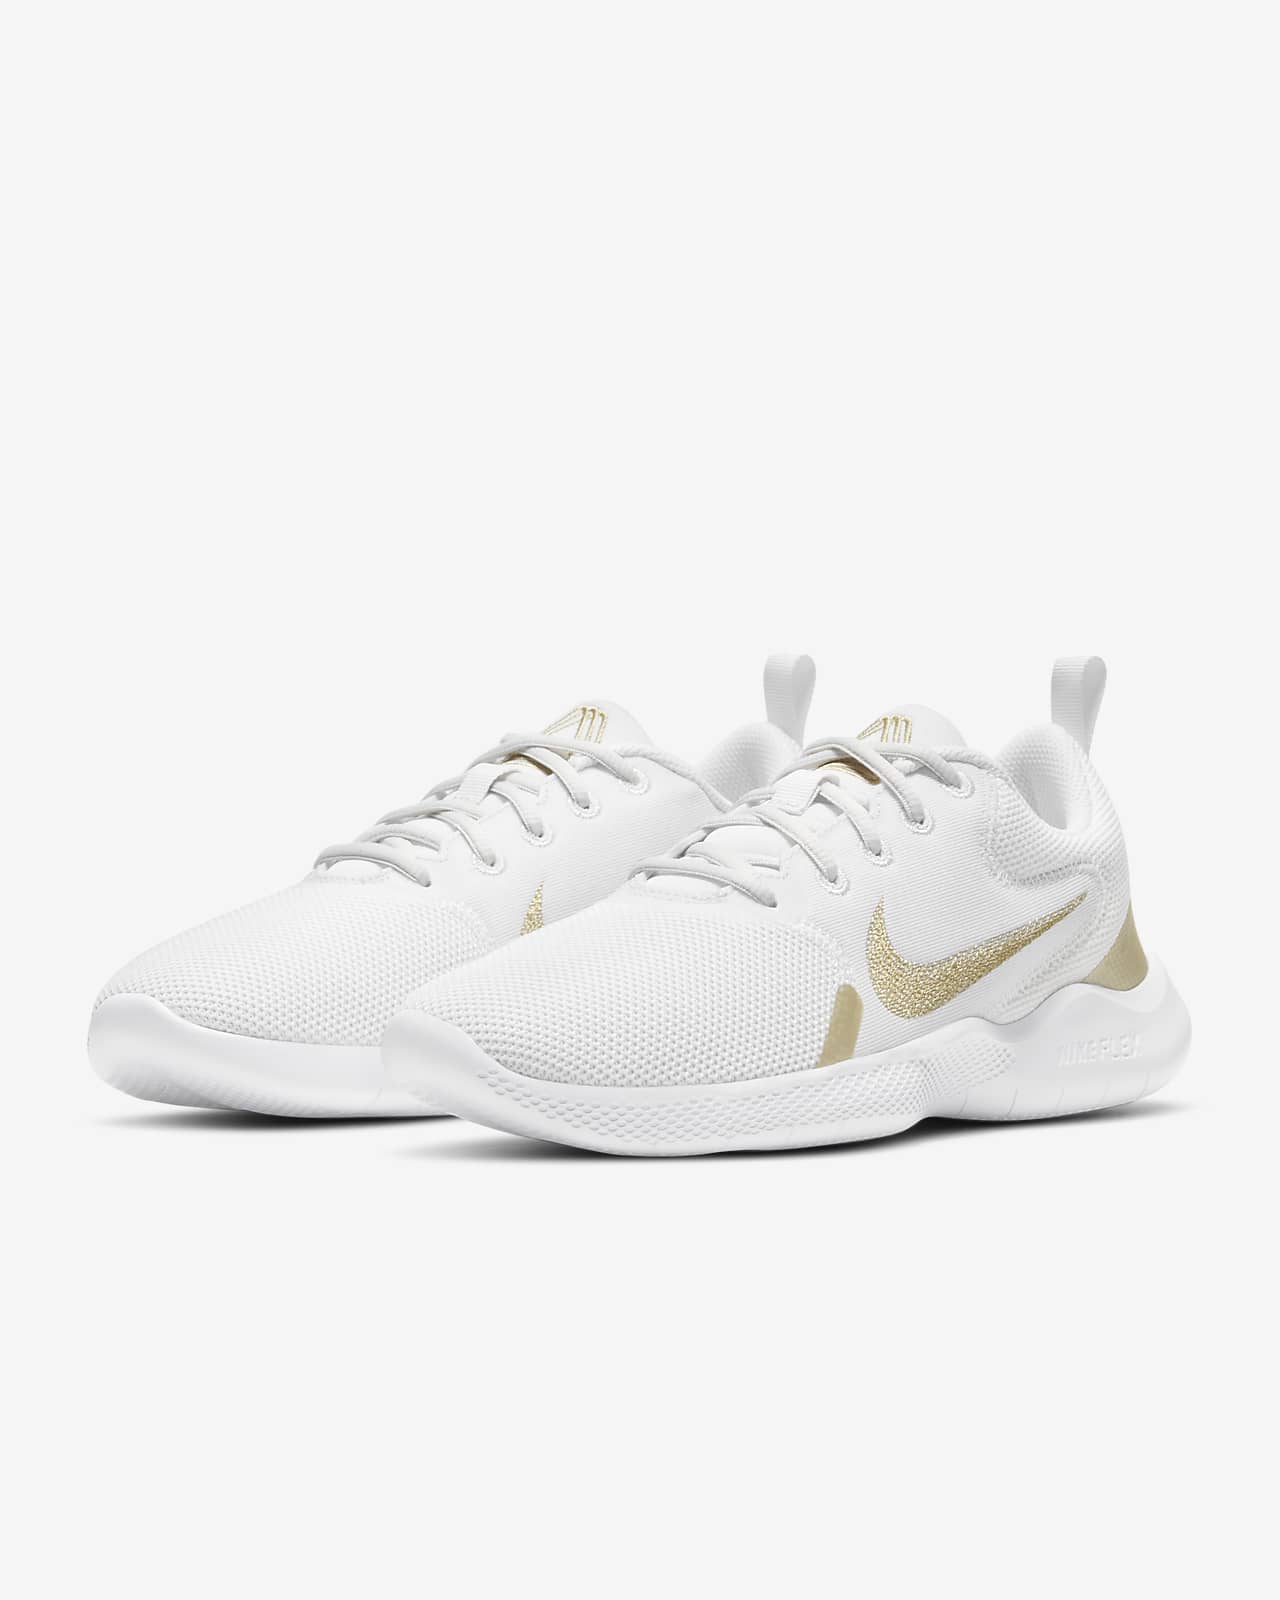 white and gold nike running shoes